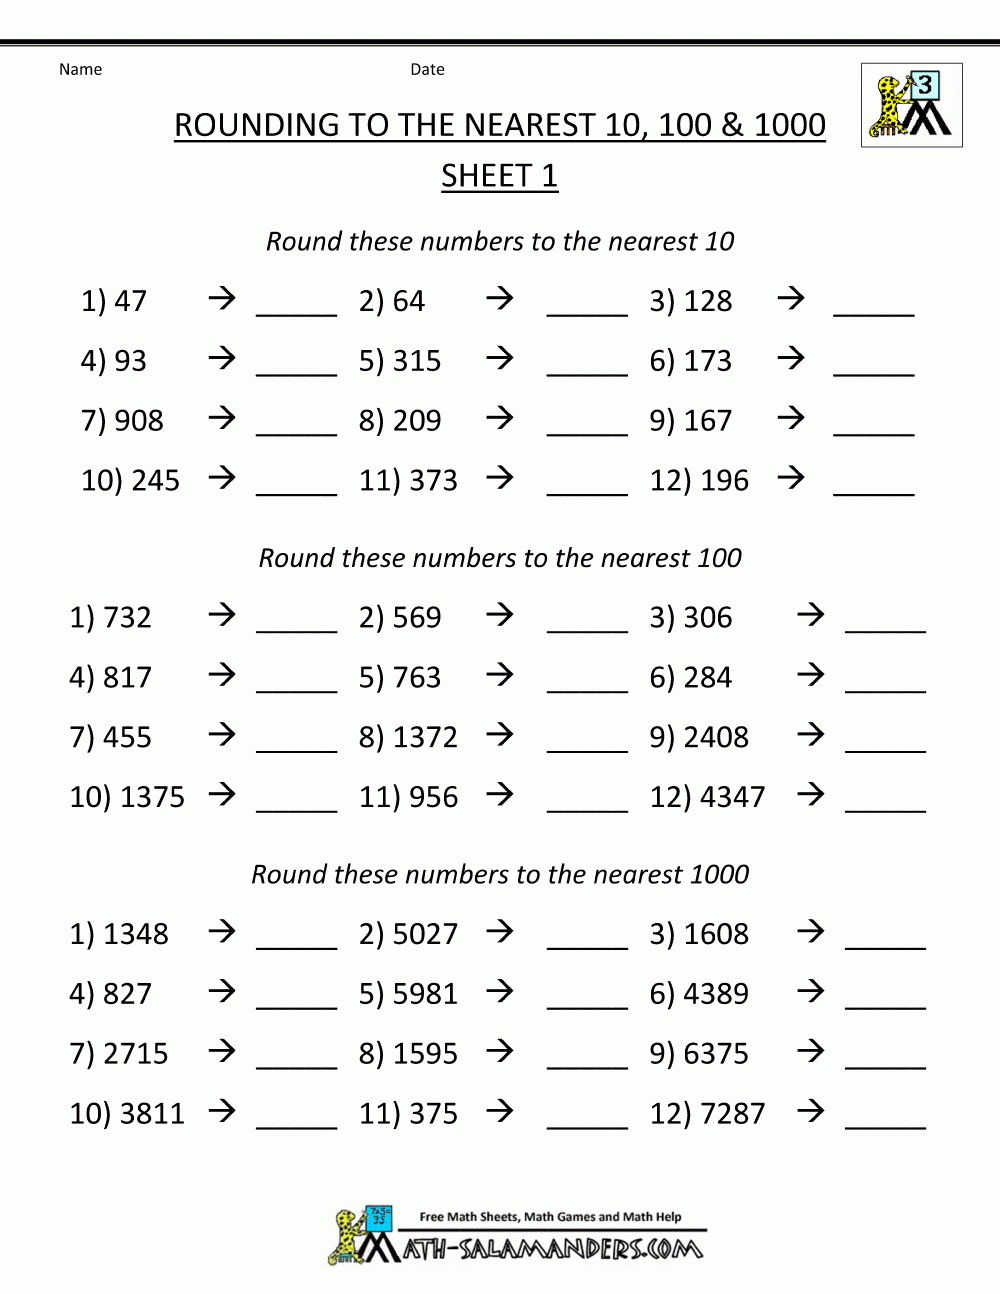 Rounding Numbers Worksheets Nearest 10 100 1000 1 | Education | Rounding Numbers Printable Worksheets